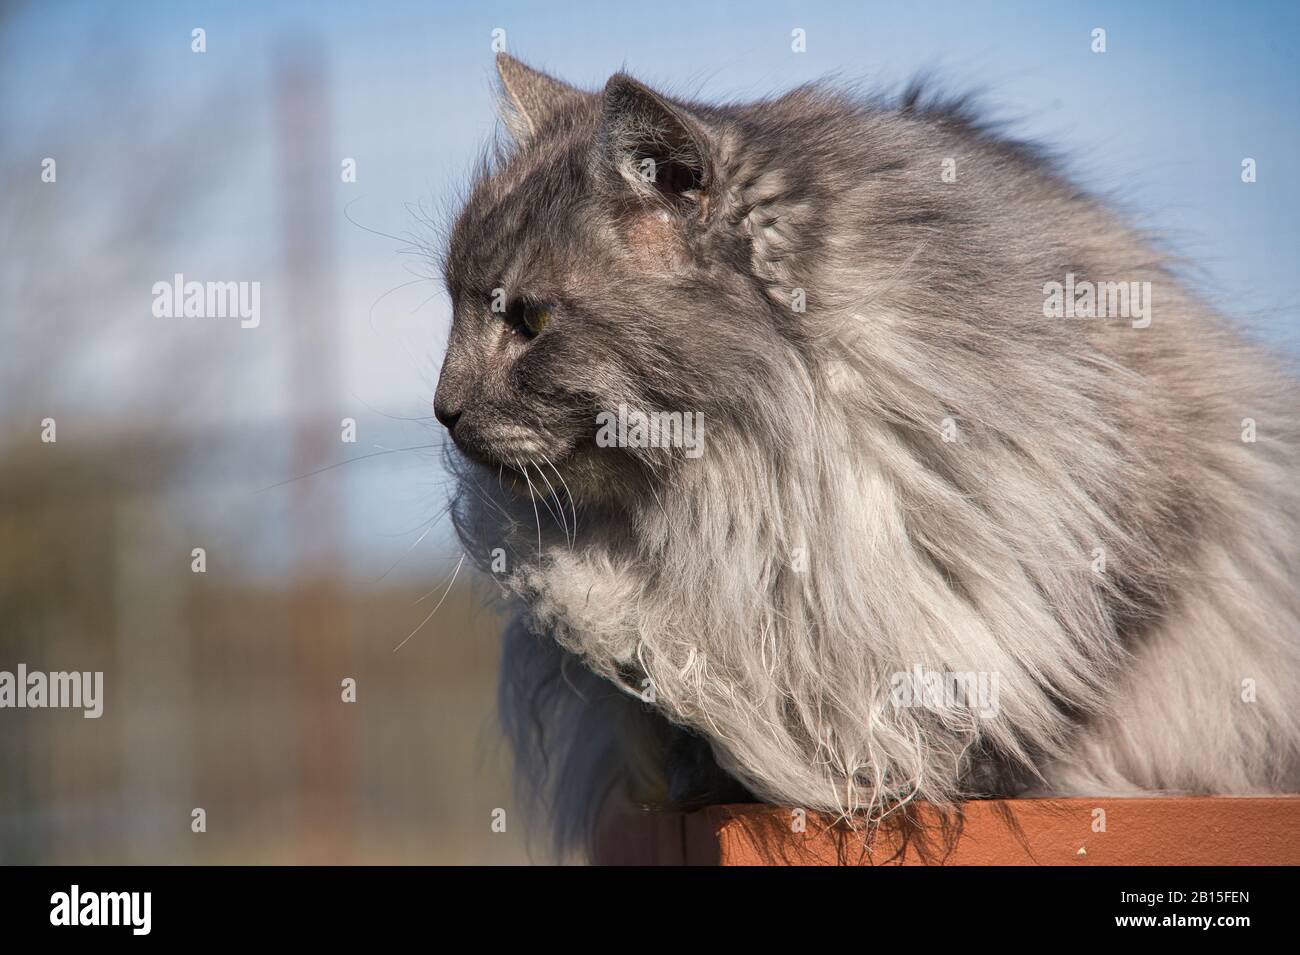 Pretty Turkish Angora cat with green eyes and long gray fur Stock Photo